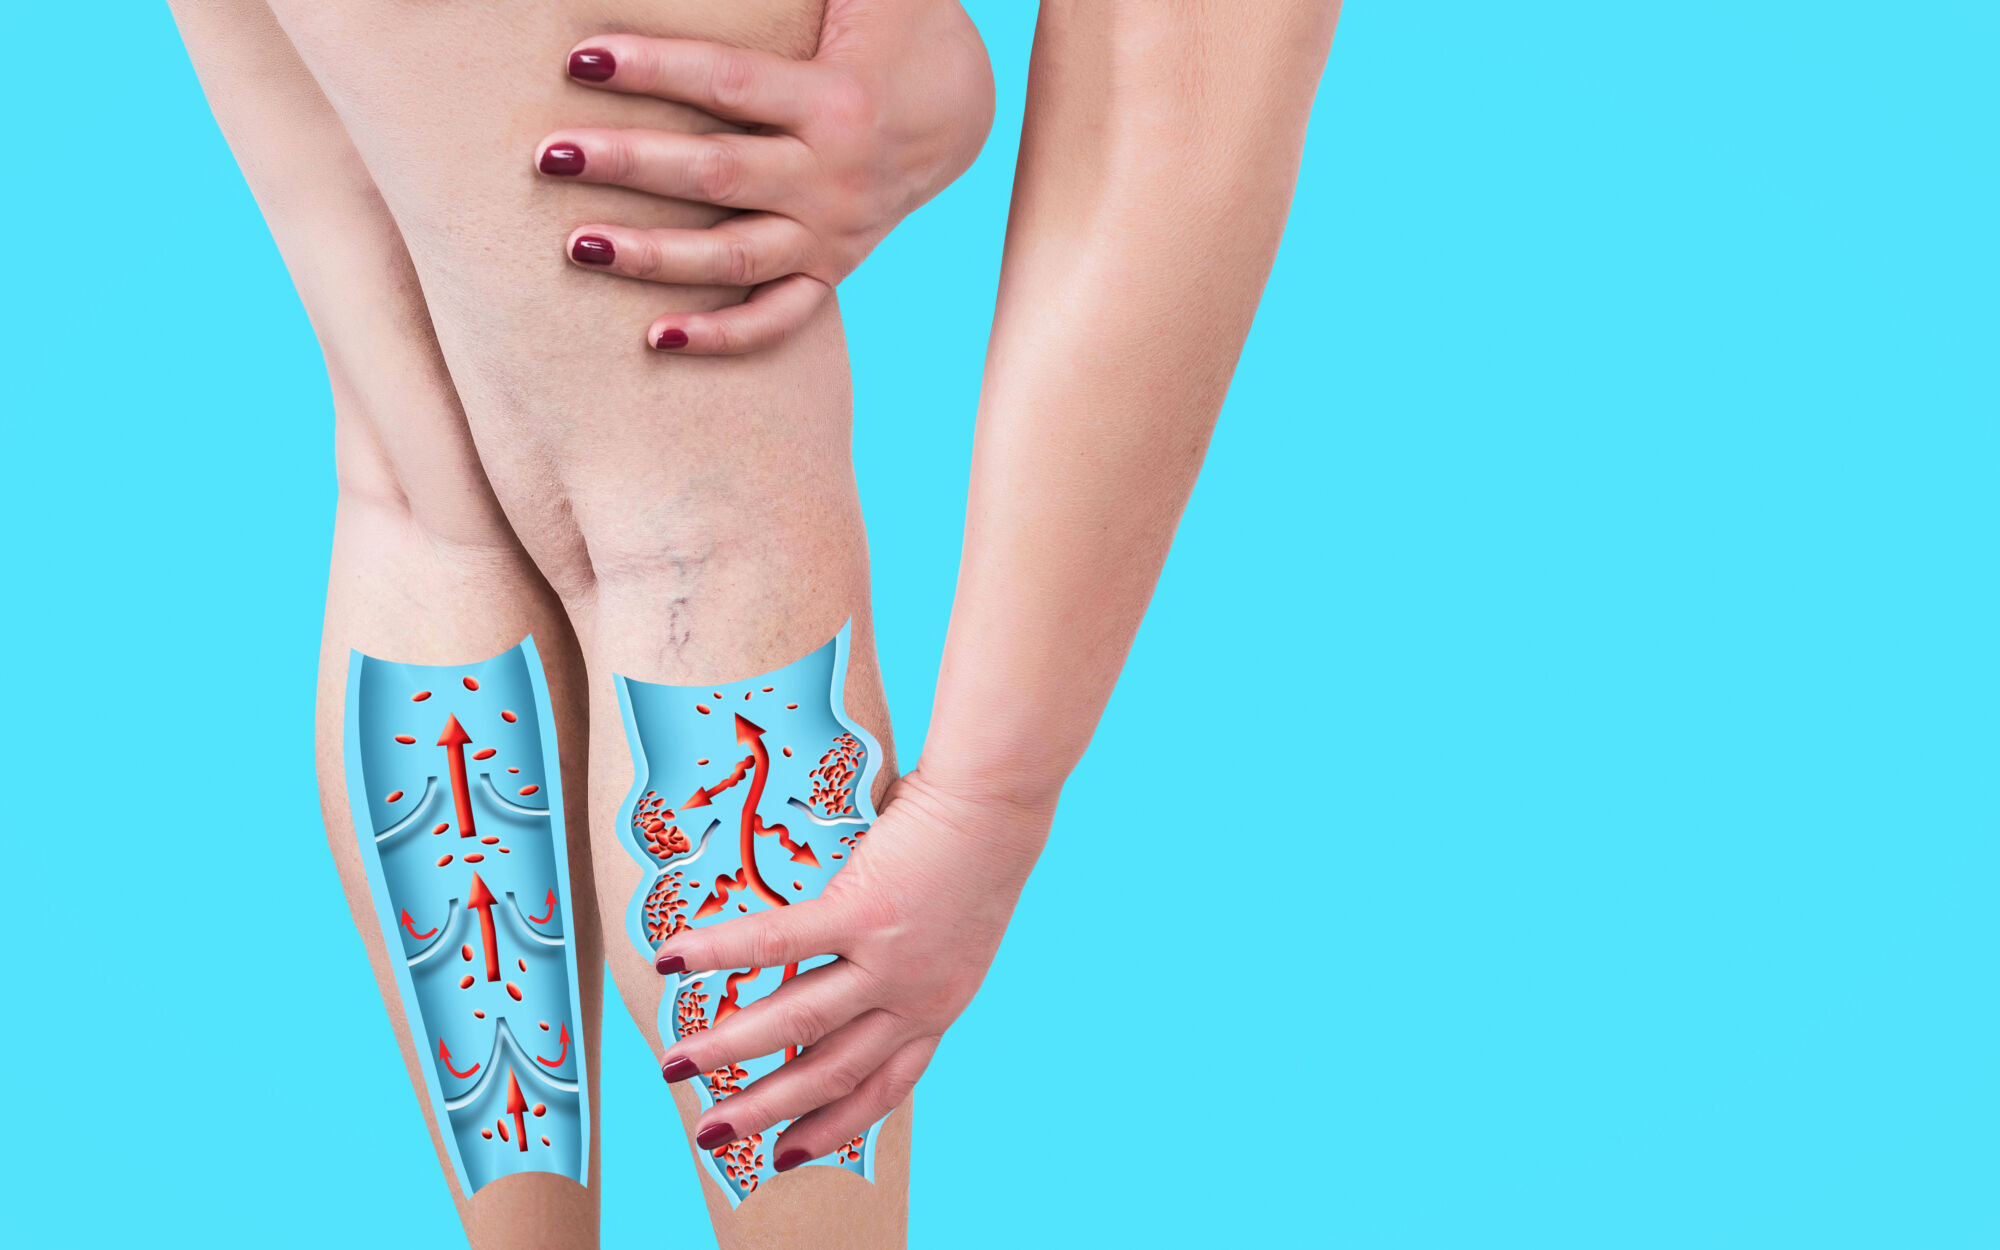 Vein Glue vs. Laser Treatment for Varicose Veins: Which is Better?